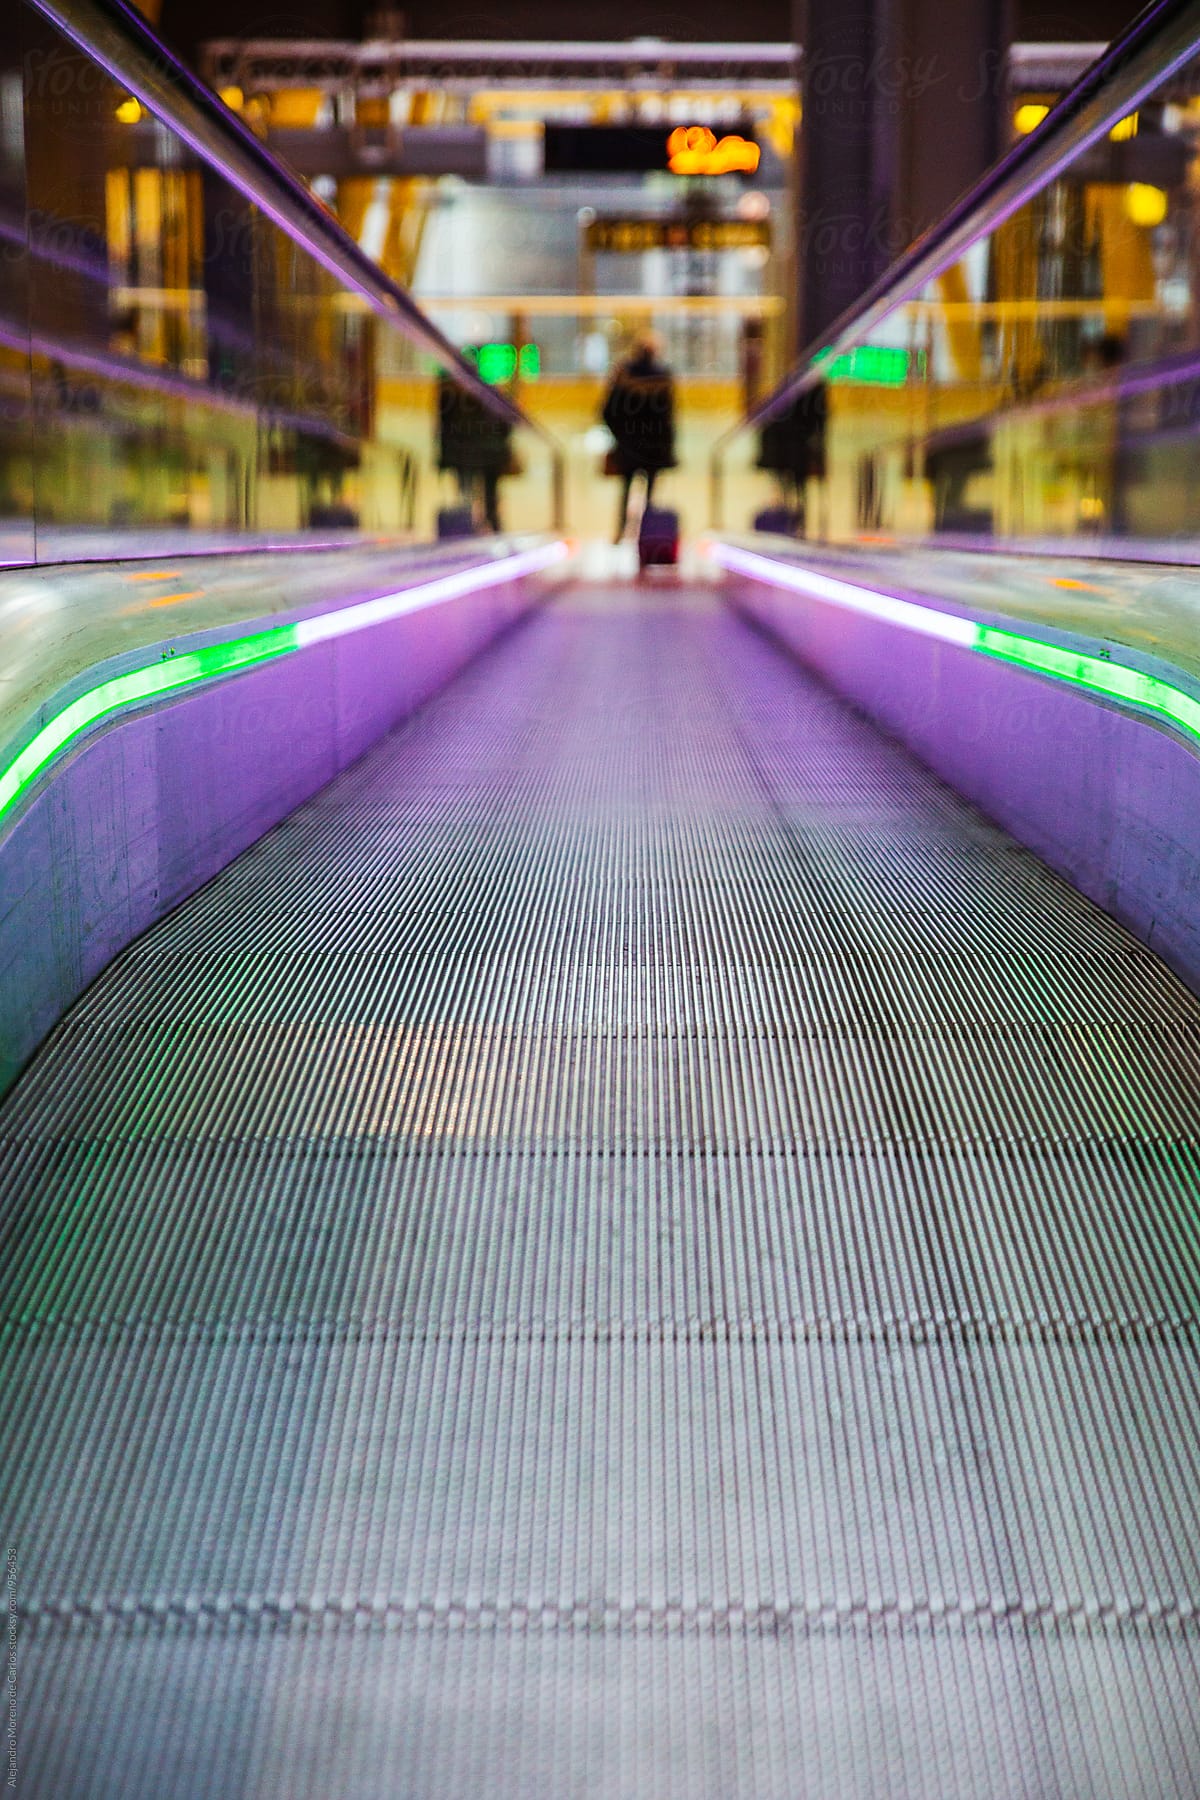 View on moving escalator going down